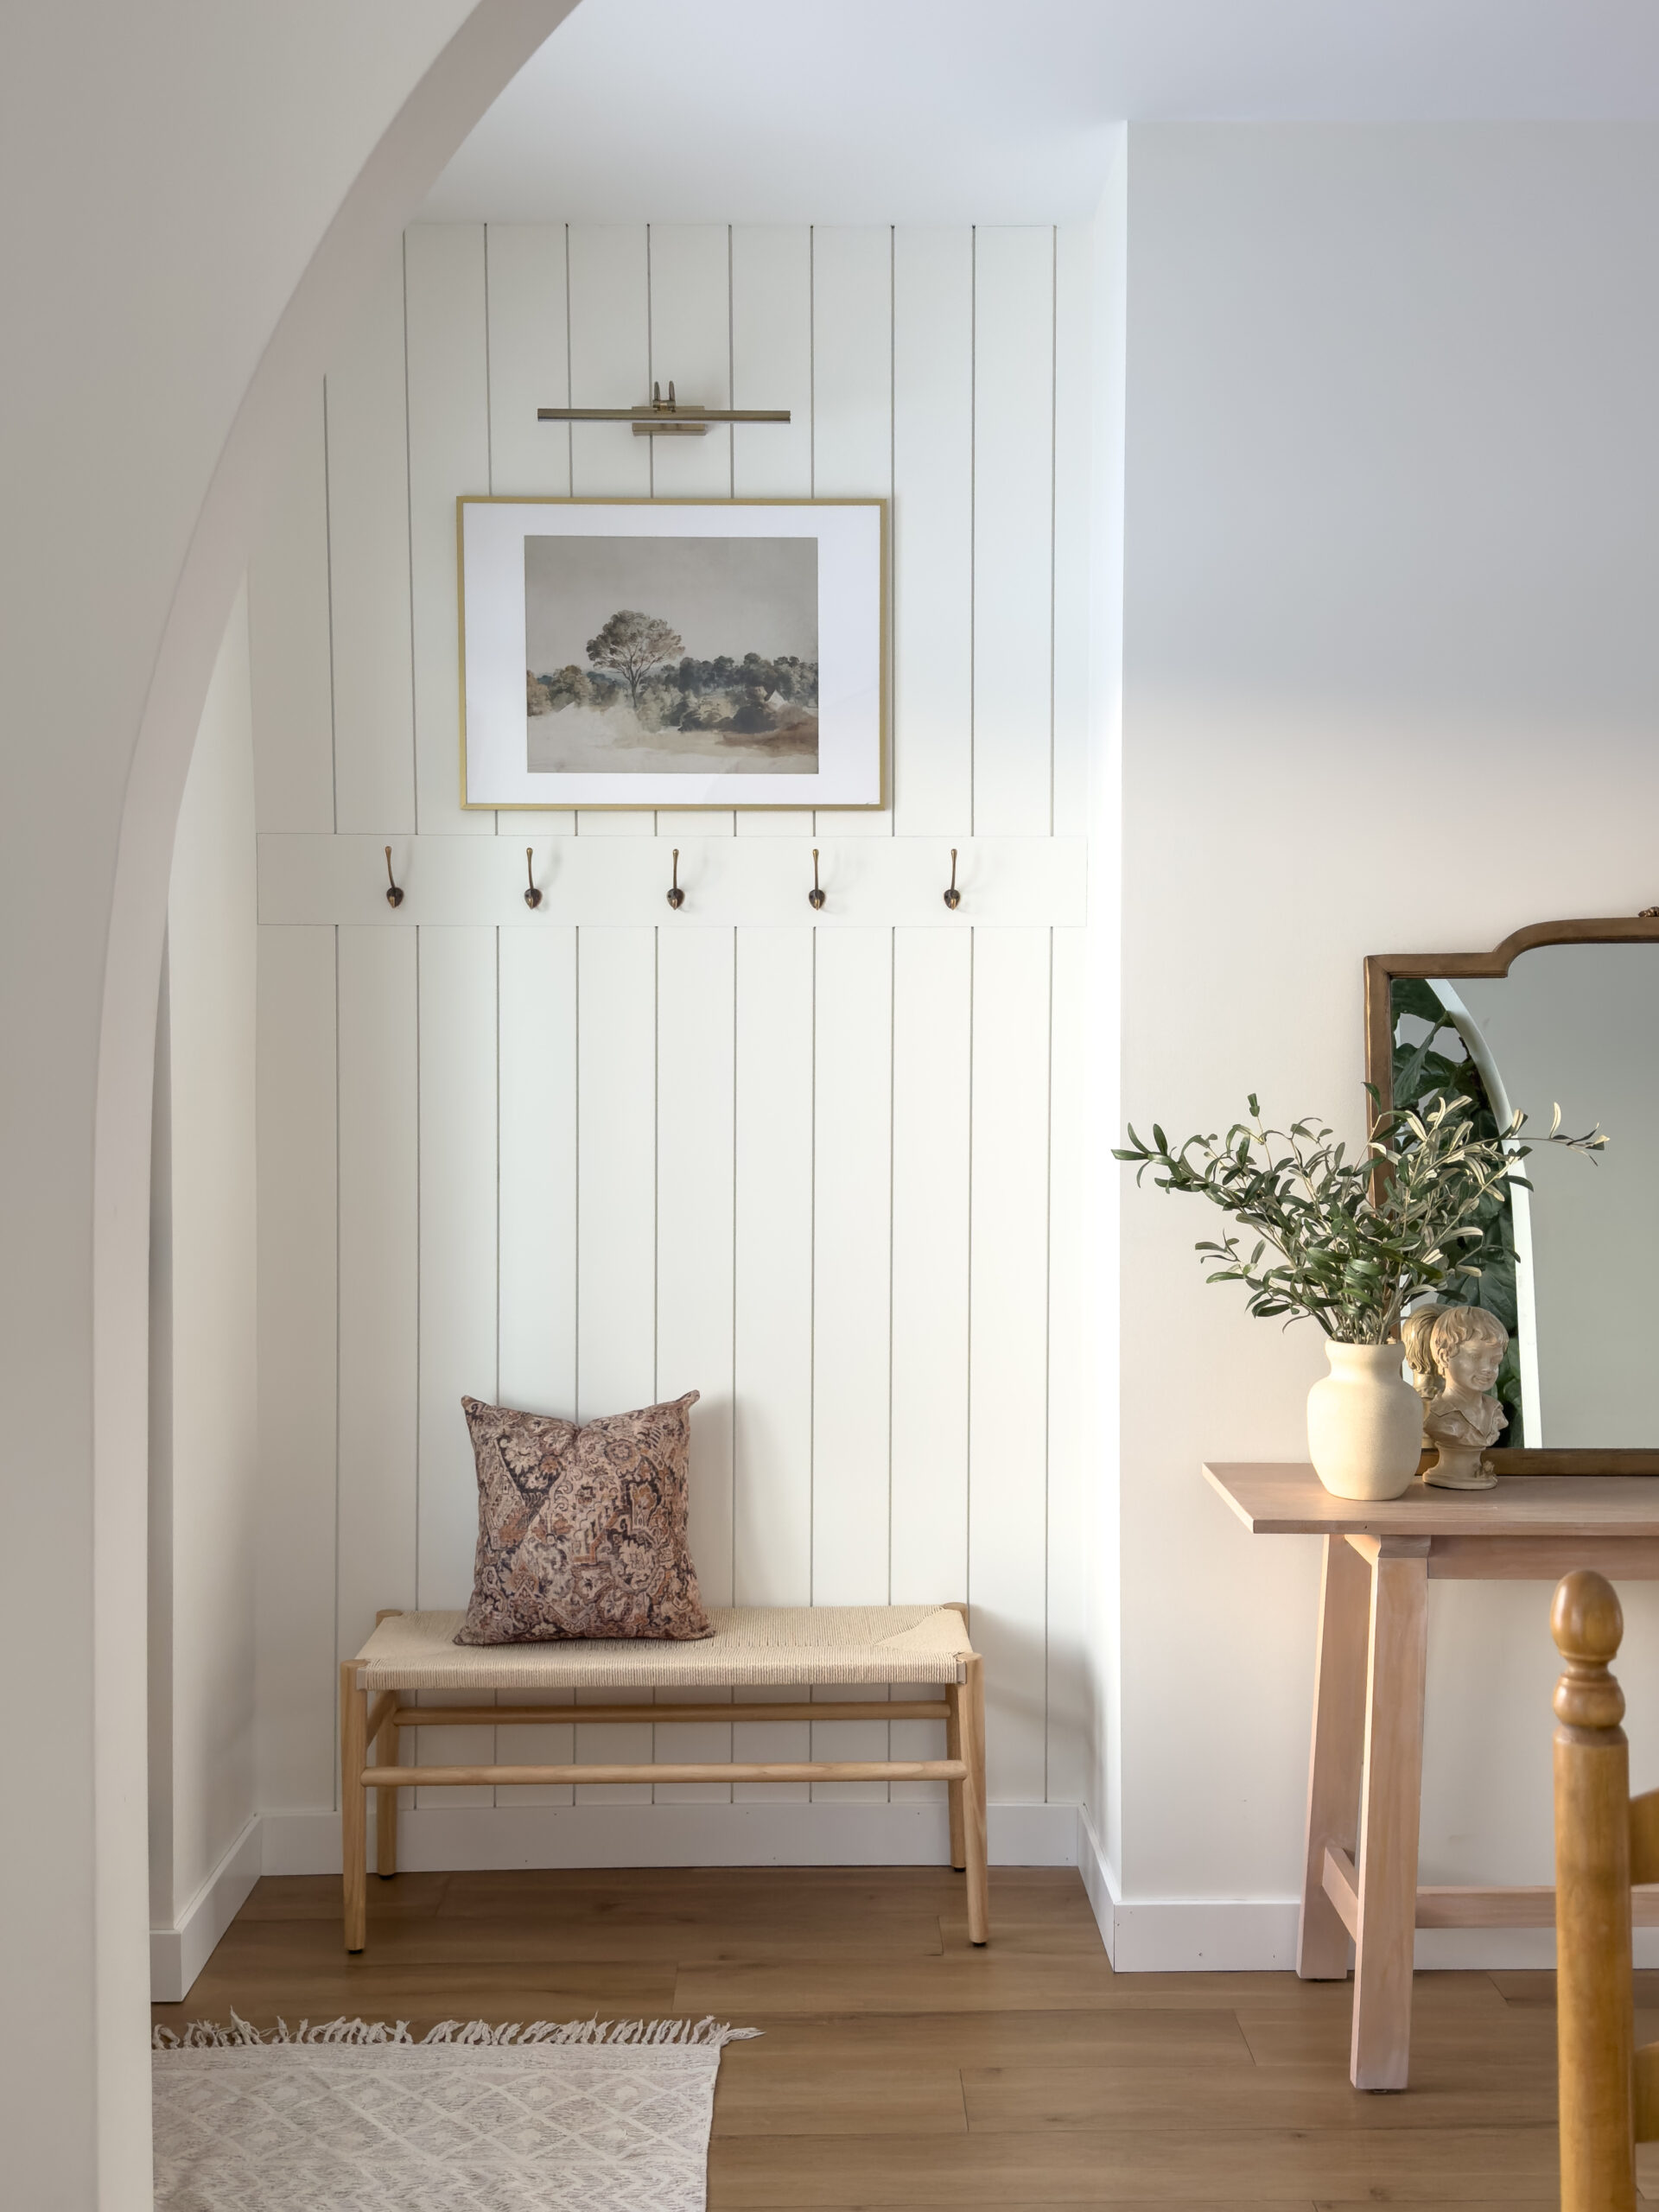 All the details on our entrance nook